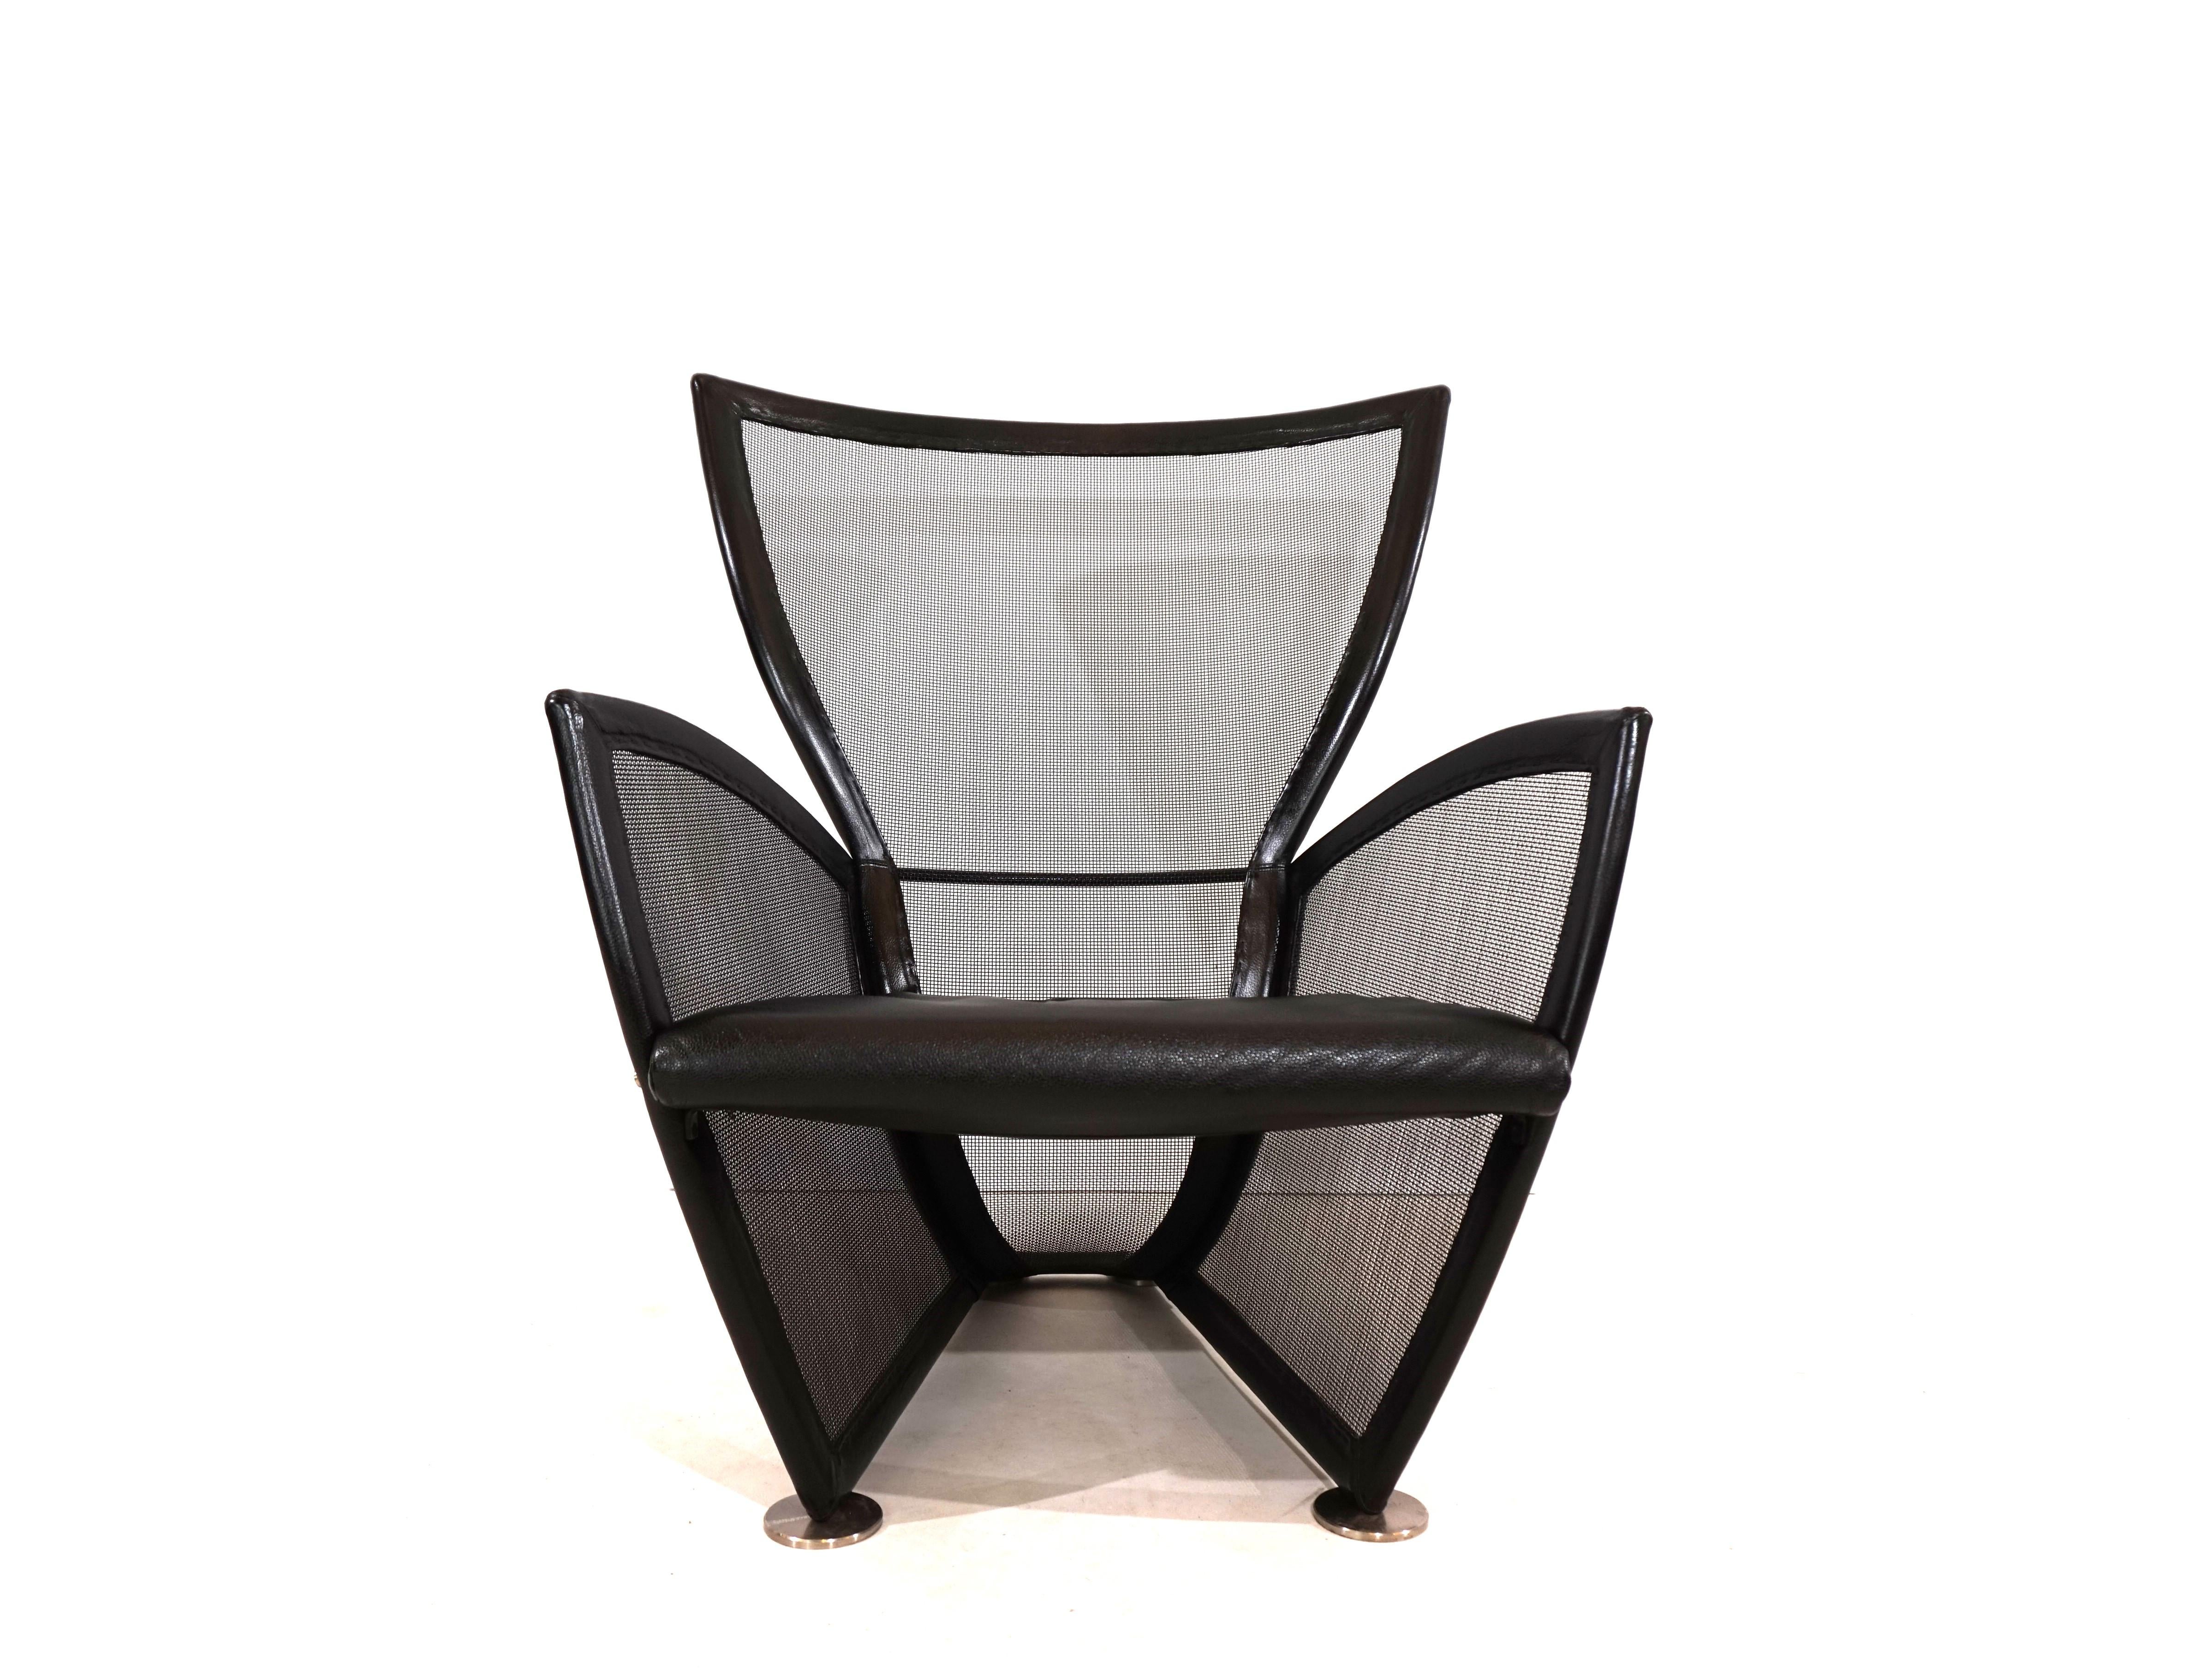 This Prive armchair with a metal mesh covered in black plastic and a metal frame with black leather edging is in excellent condition. The armchair looks almost as good as new, with minimal signs of wear. The generous seat is made of black leather.